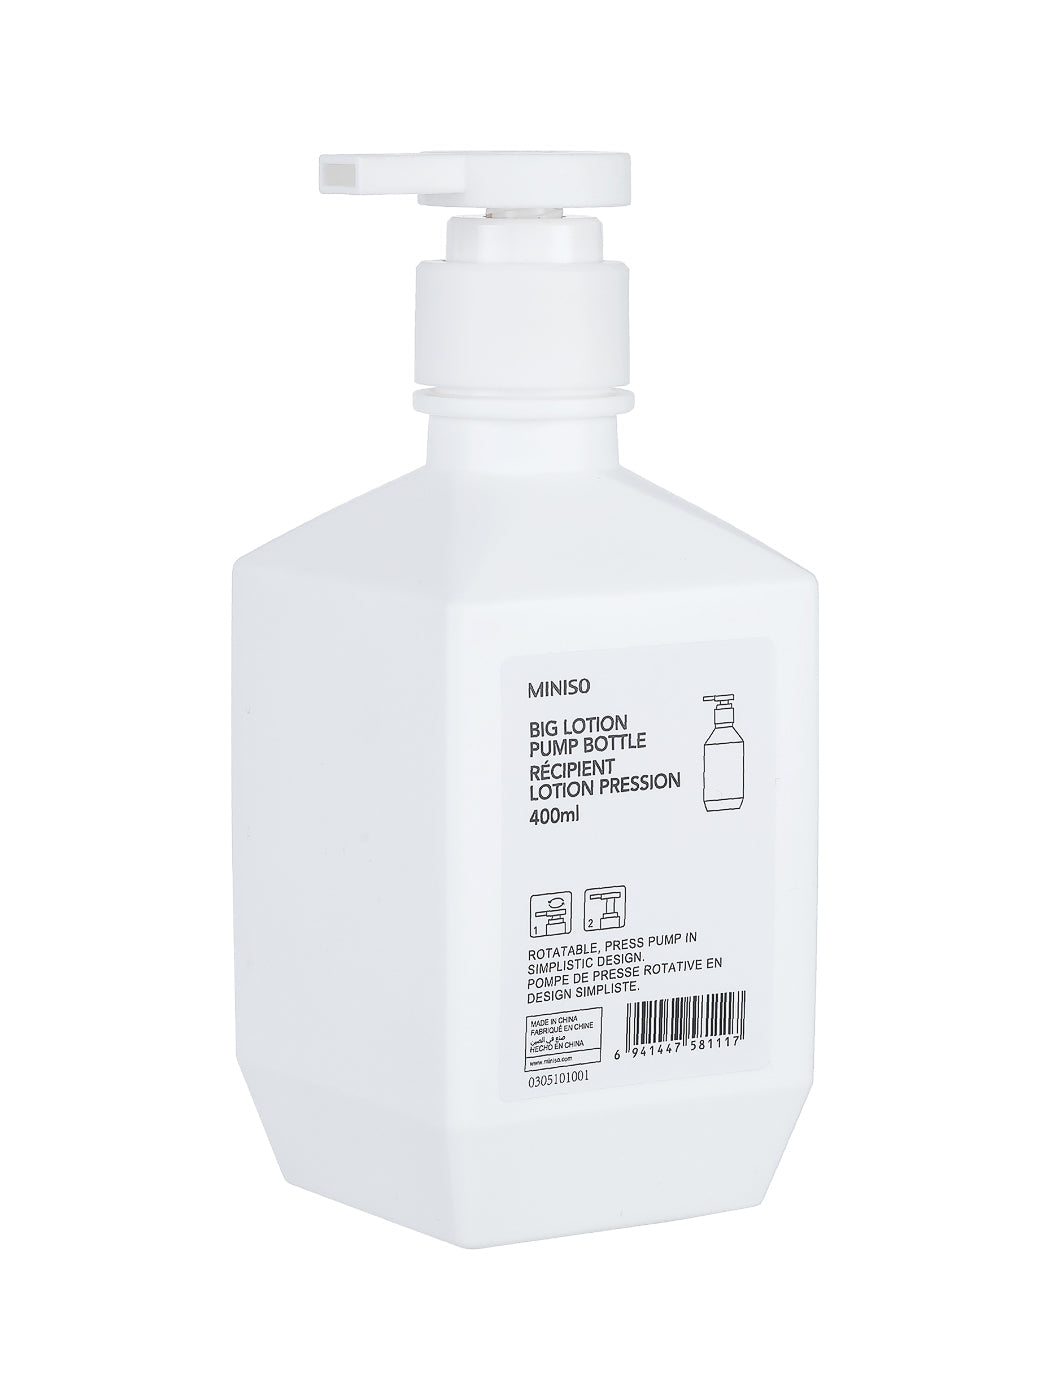 MINISO LARGE PRESS-TYPE LOTION CONTAINER 400ML 2010216210108 BATHROOM SUPPLIES-1